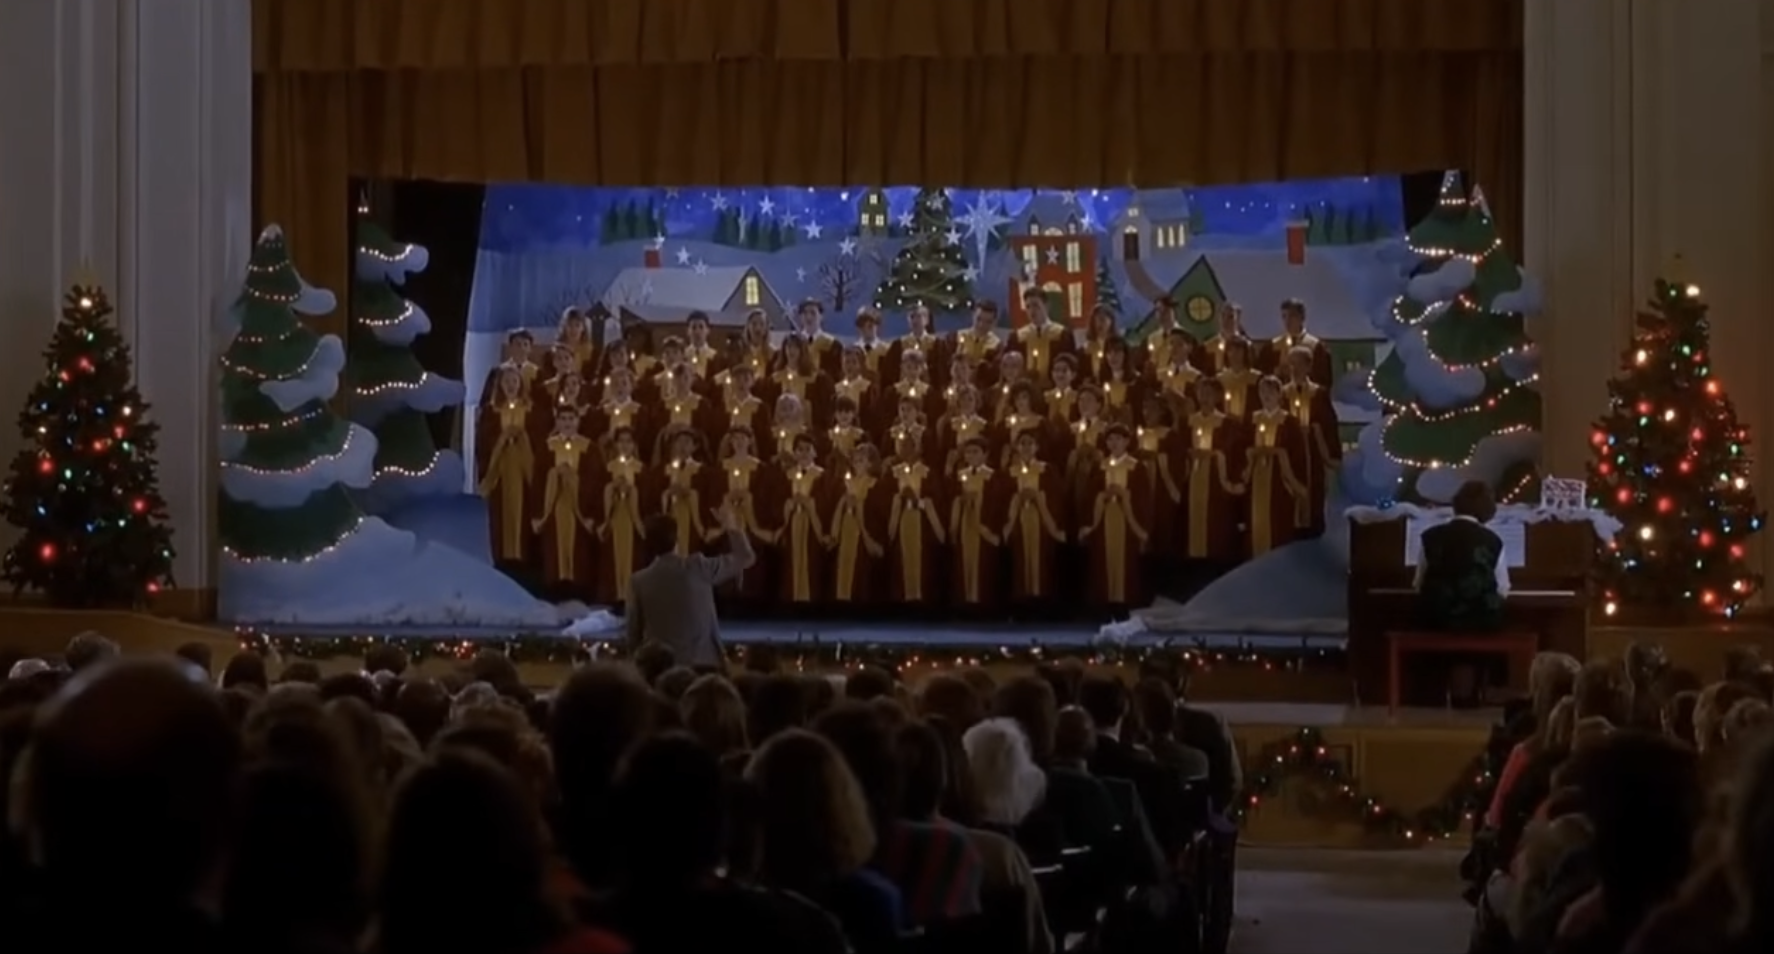 Children&#x27;s choir onstage in a festive setup with audience in foreground